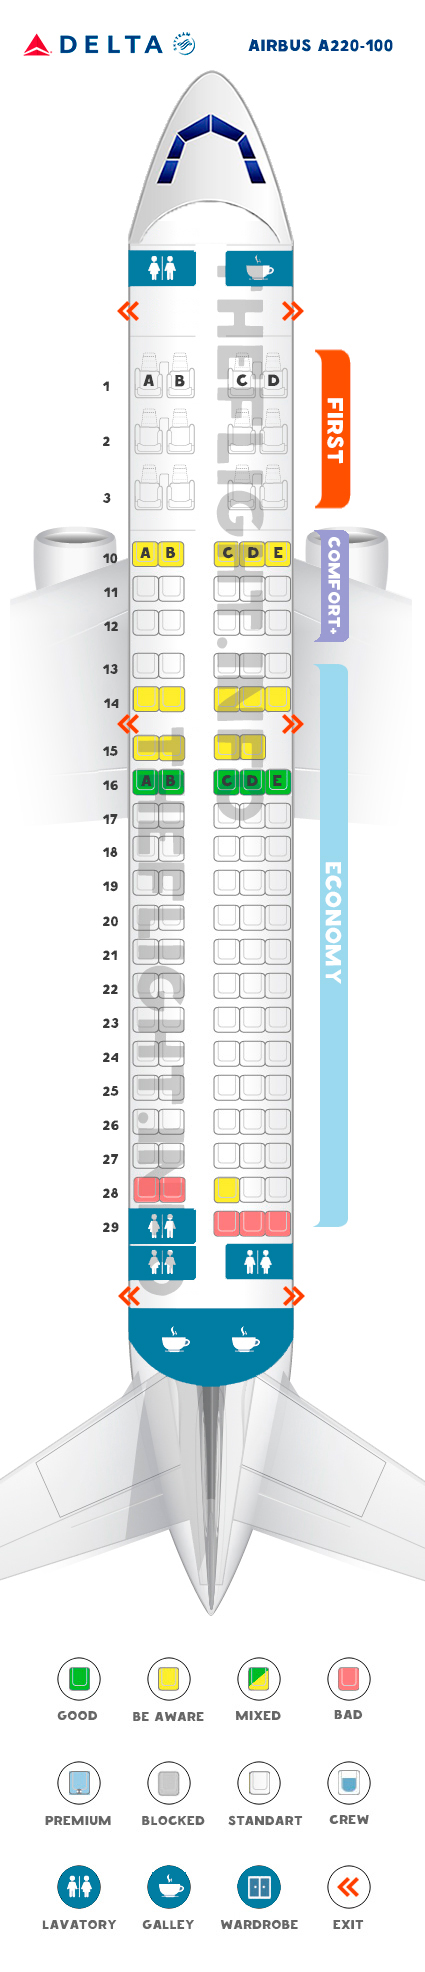 Delta A220 300 Seat Map